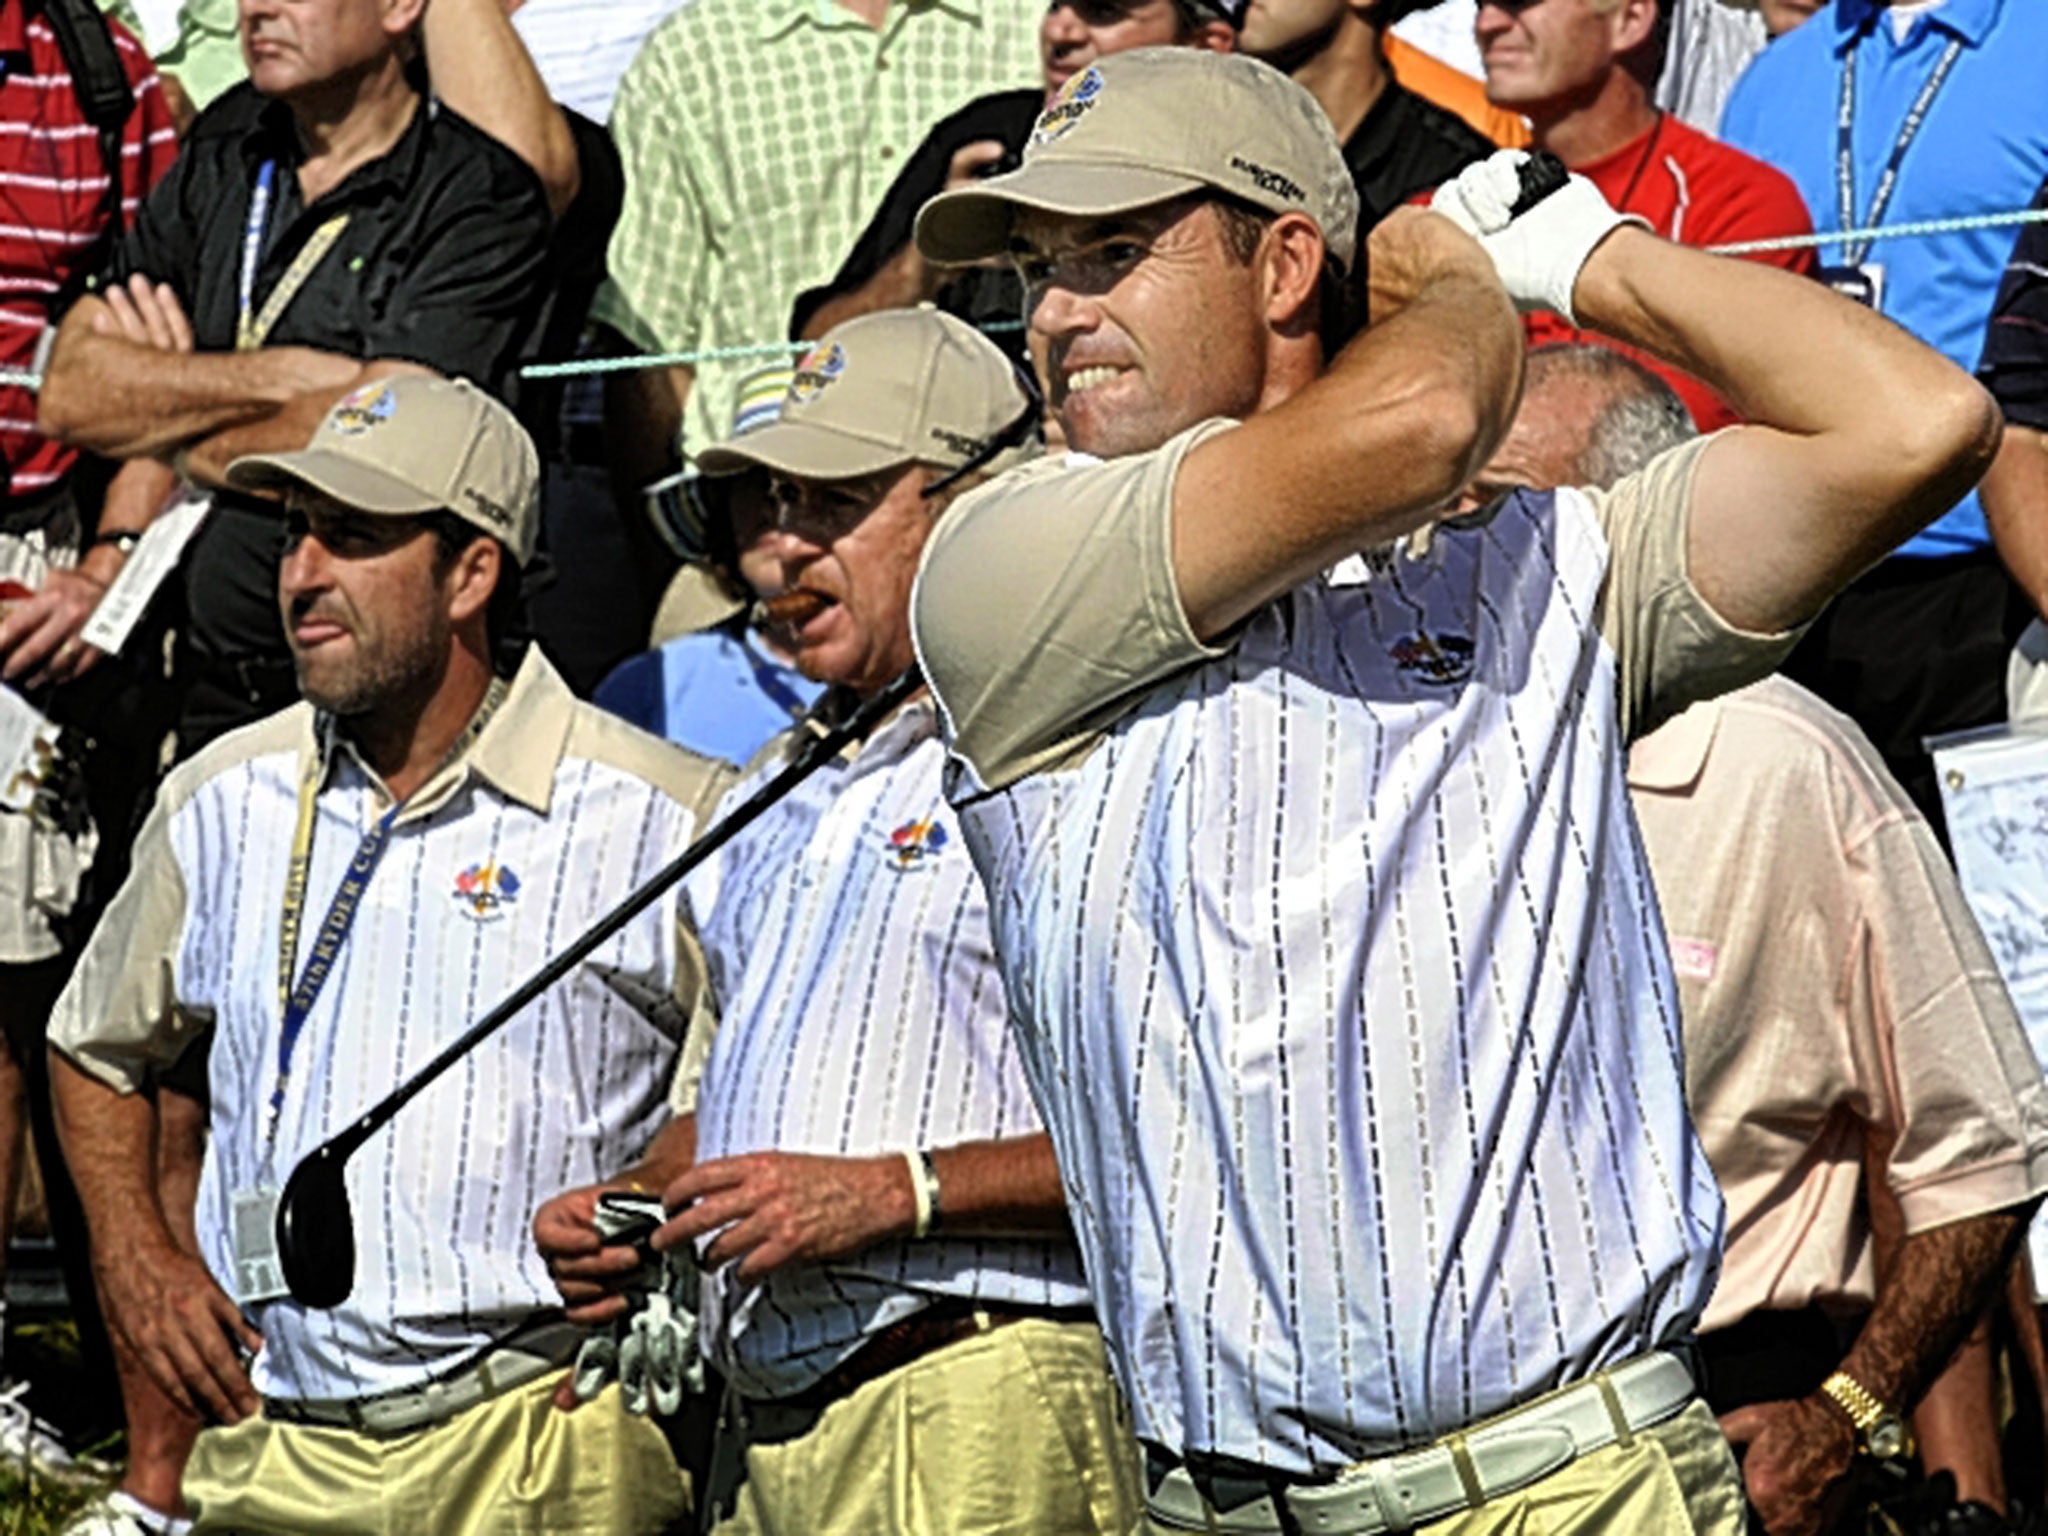 Europe’s new vice-captains – (left to right) Olazabal, Jimenez and Harrington – in Ryder Cup action at Valhalla in 200